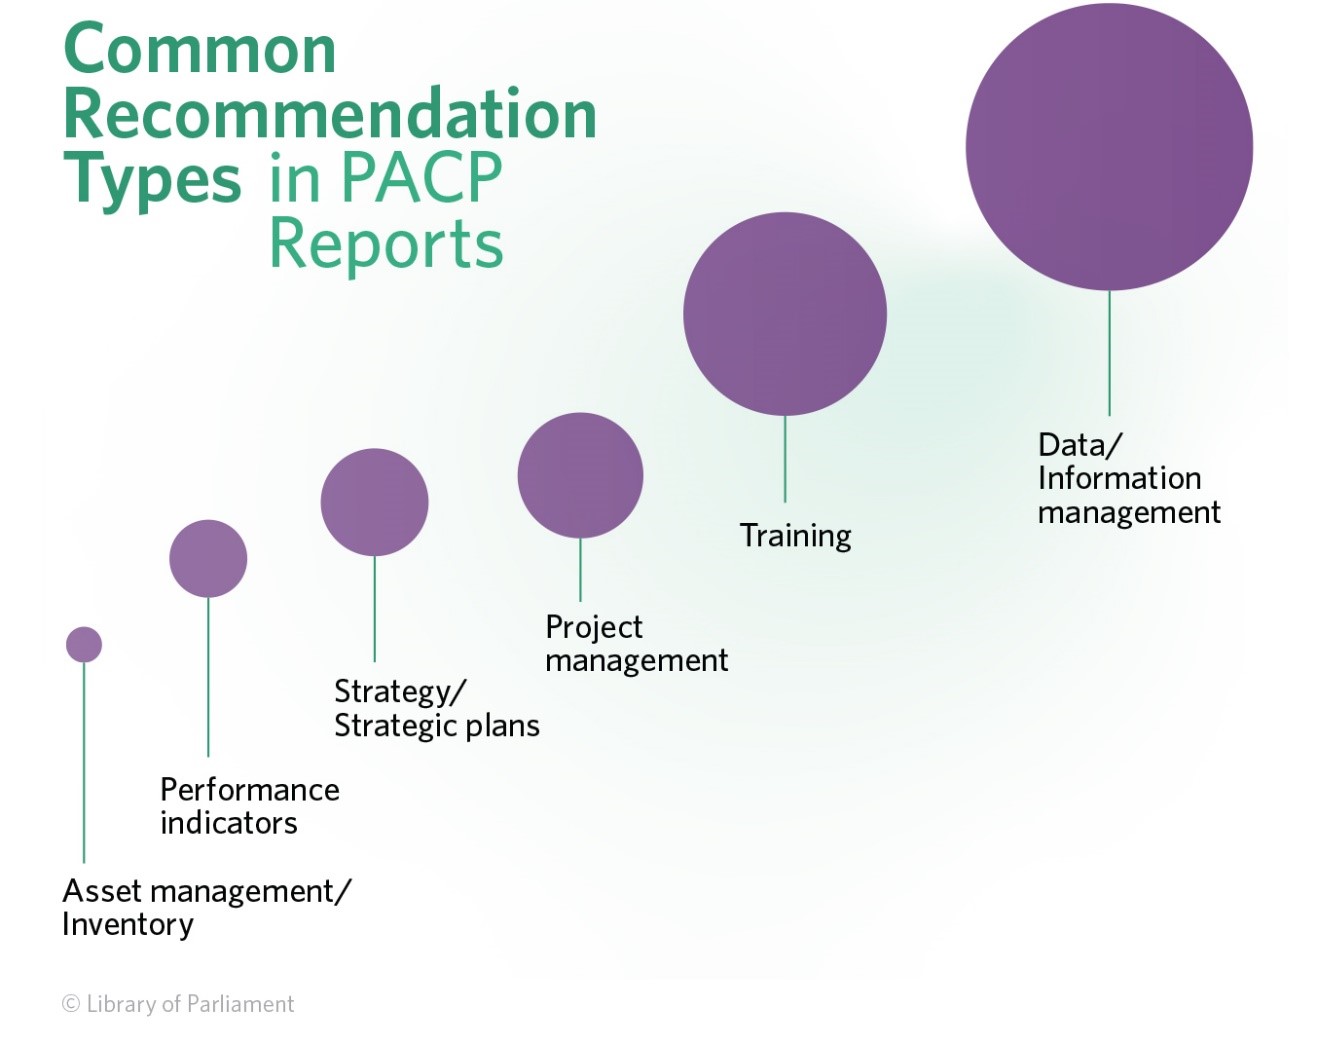 This image shows a series of bubbles that get slightly bigger going from left to right; they symbolize the most common types of PACP recommendations in ascending order, namely:  Asset management/ Inventory; Performance Indicators; Project Management; Training; Data / Information Management.